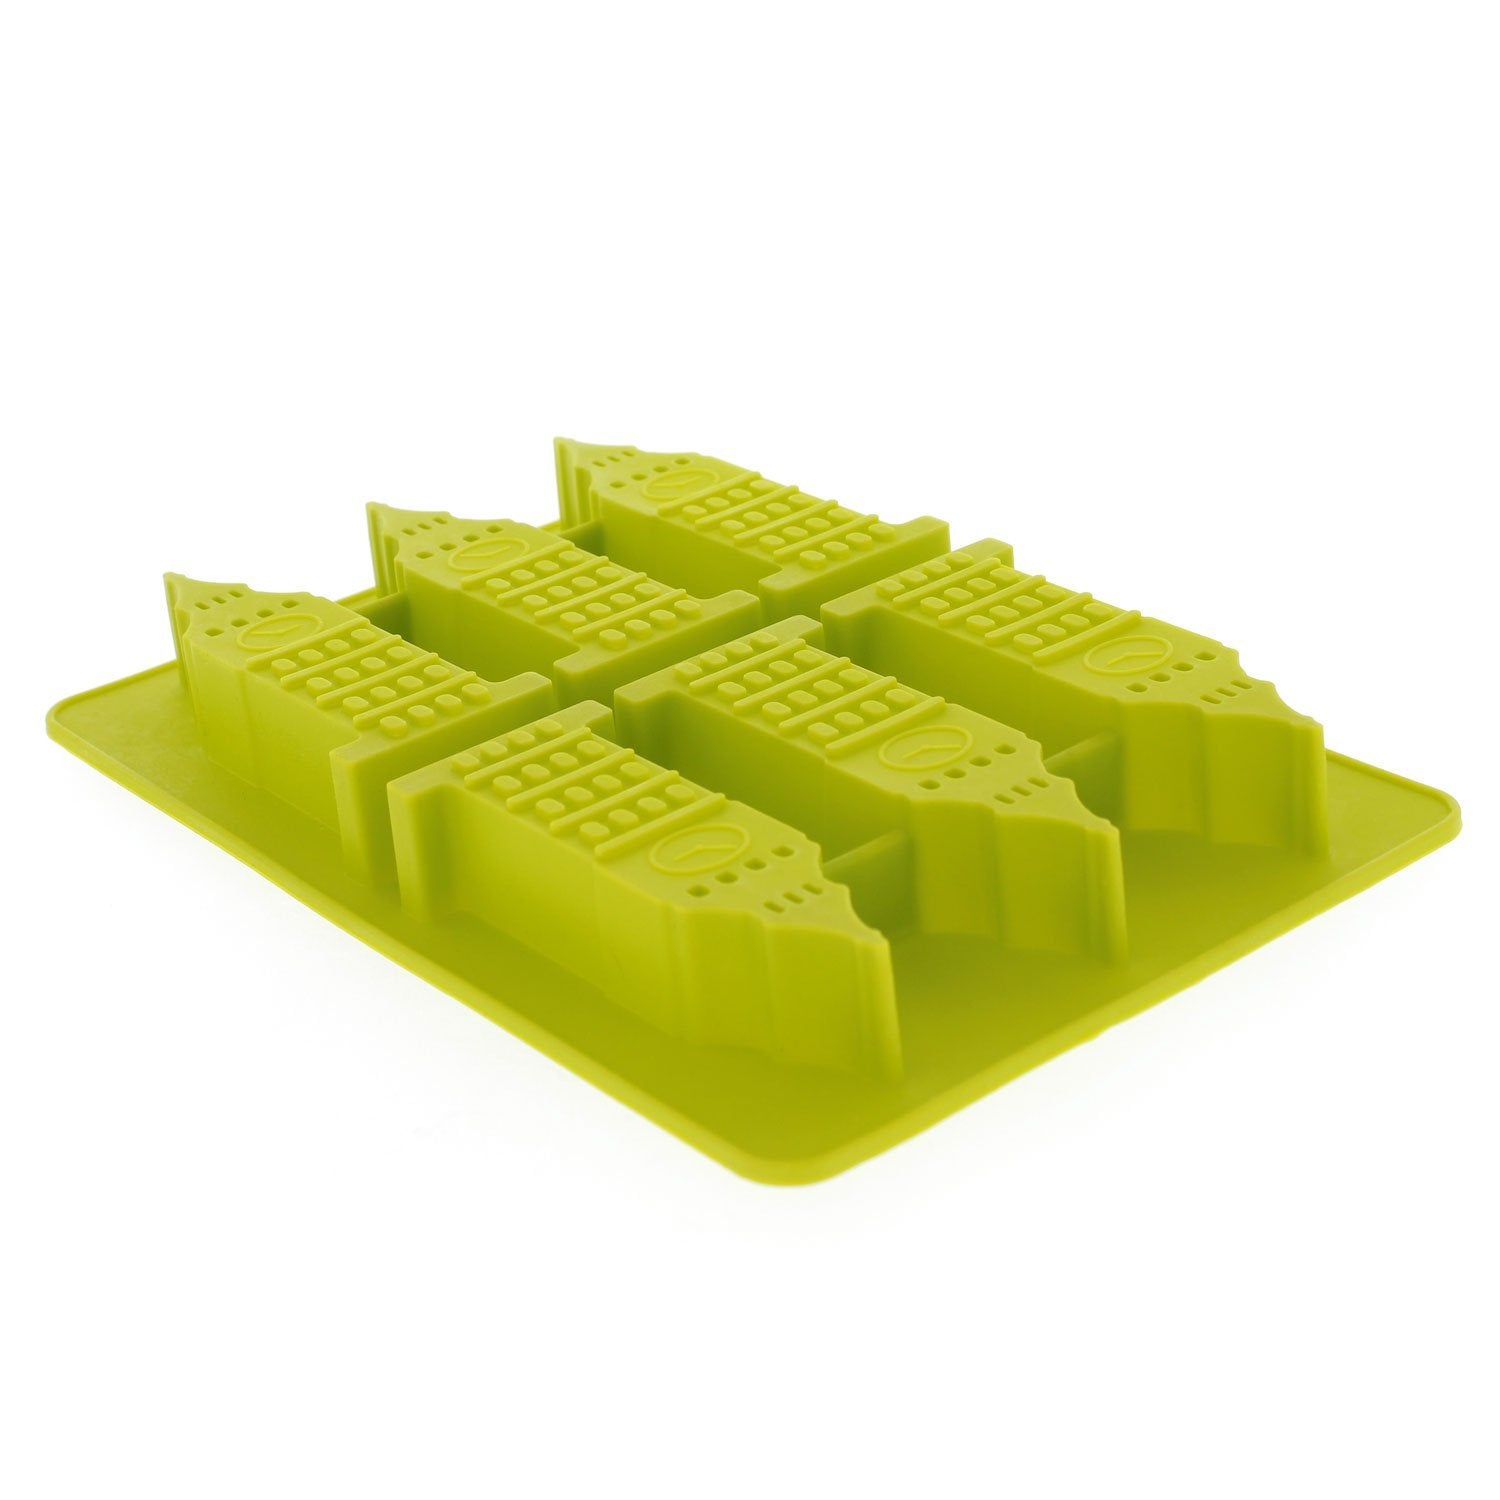 Elbee Home 6-Piece Silicone Big Ben Tray for Making Homemade Ice, Candy, Chocolate, Gummy, Jello, and More